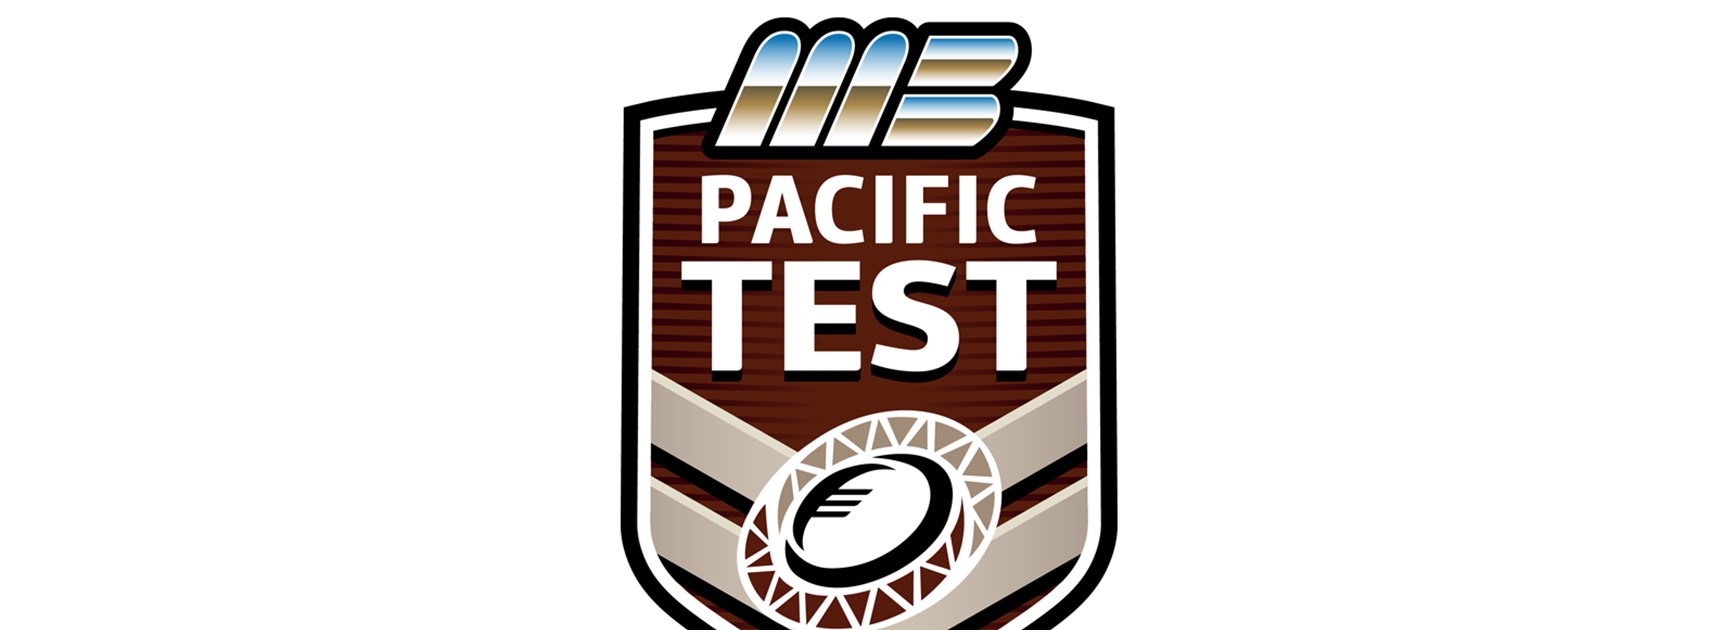 Mesh & Bar official naming rights partner of Pacific Test